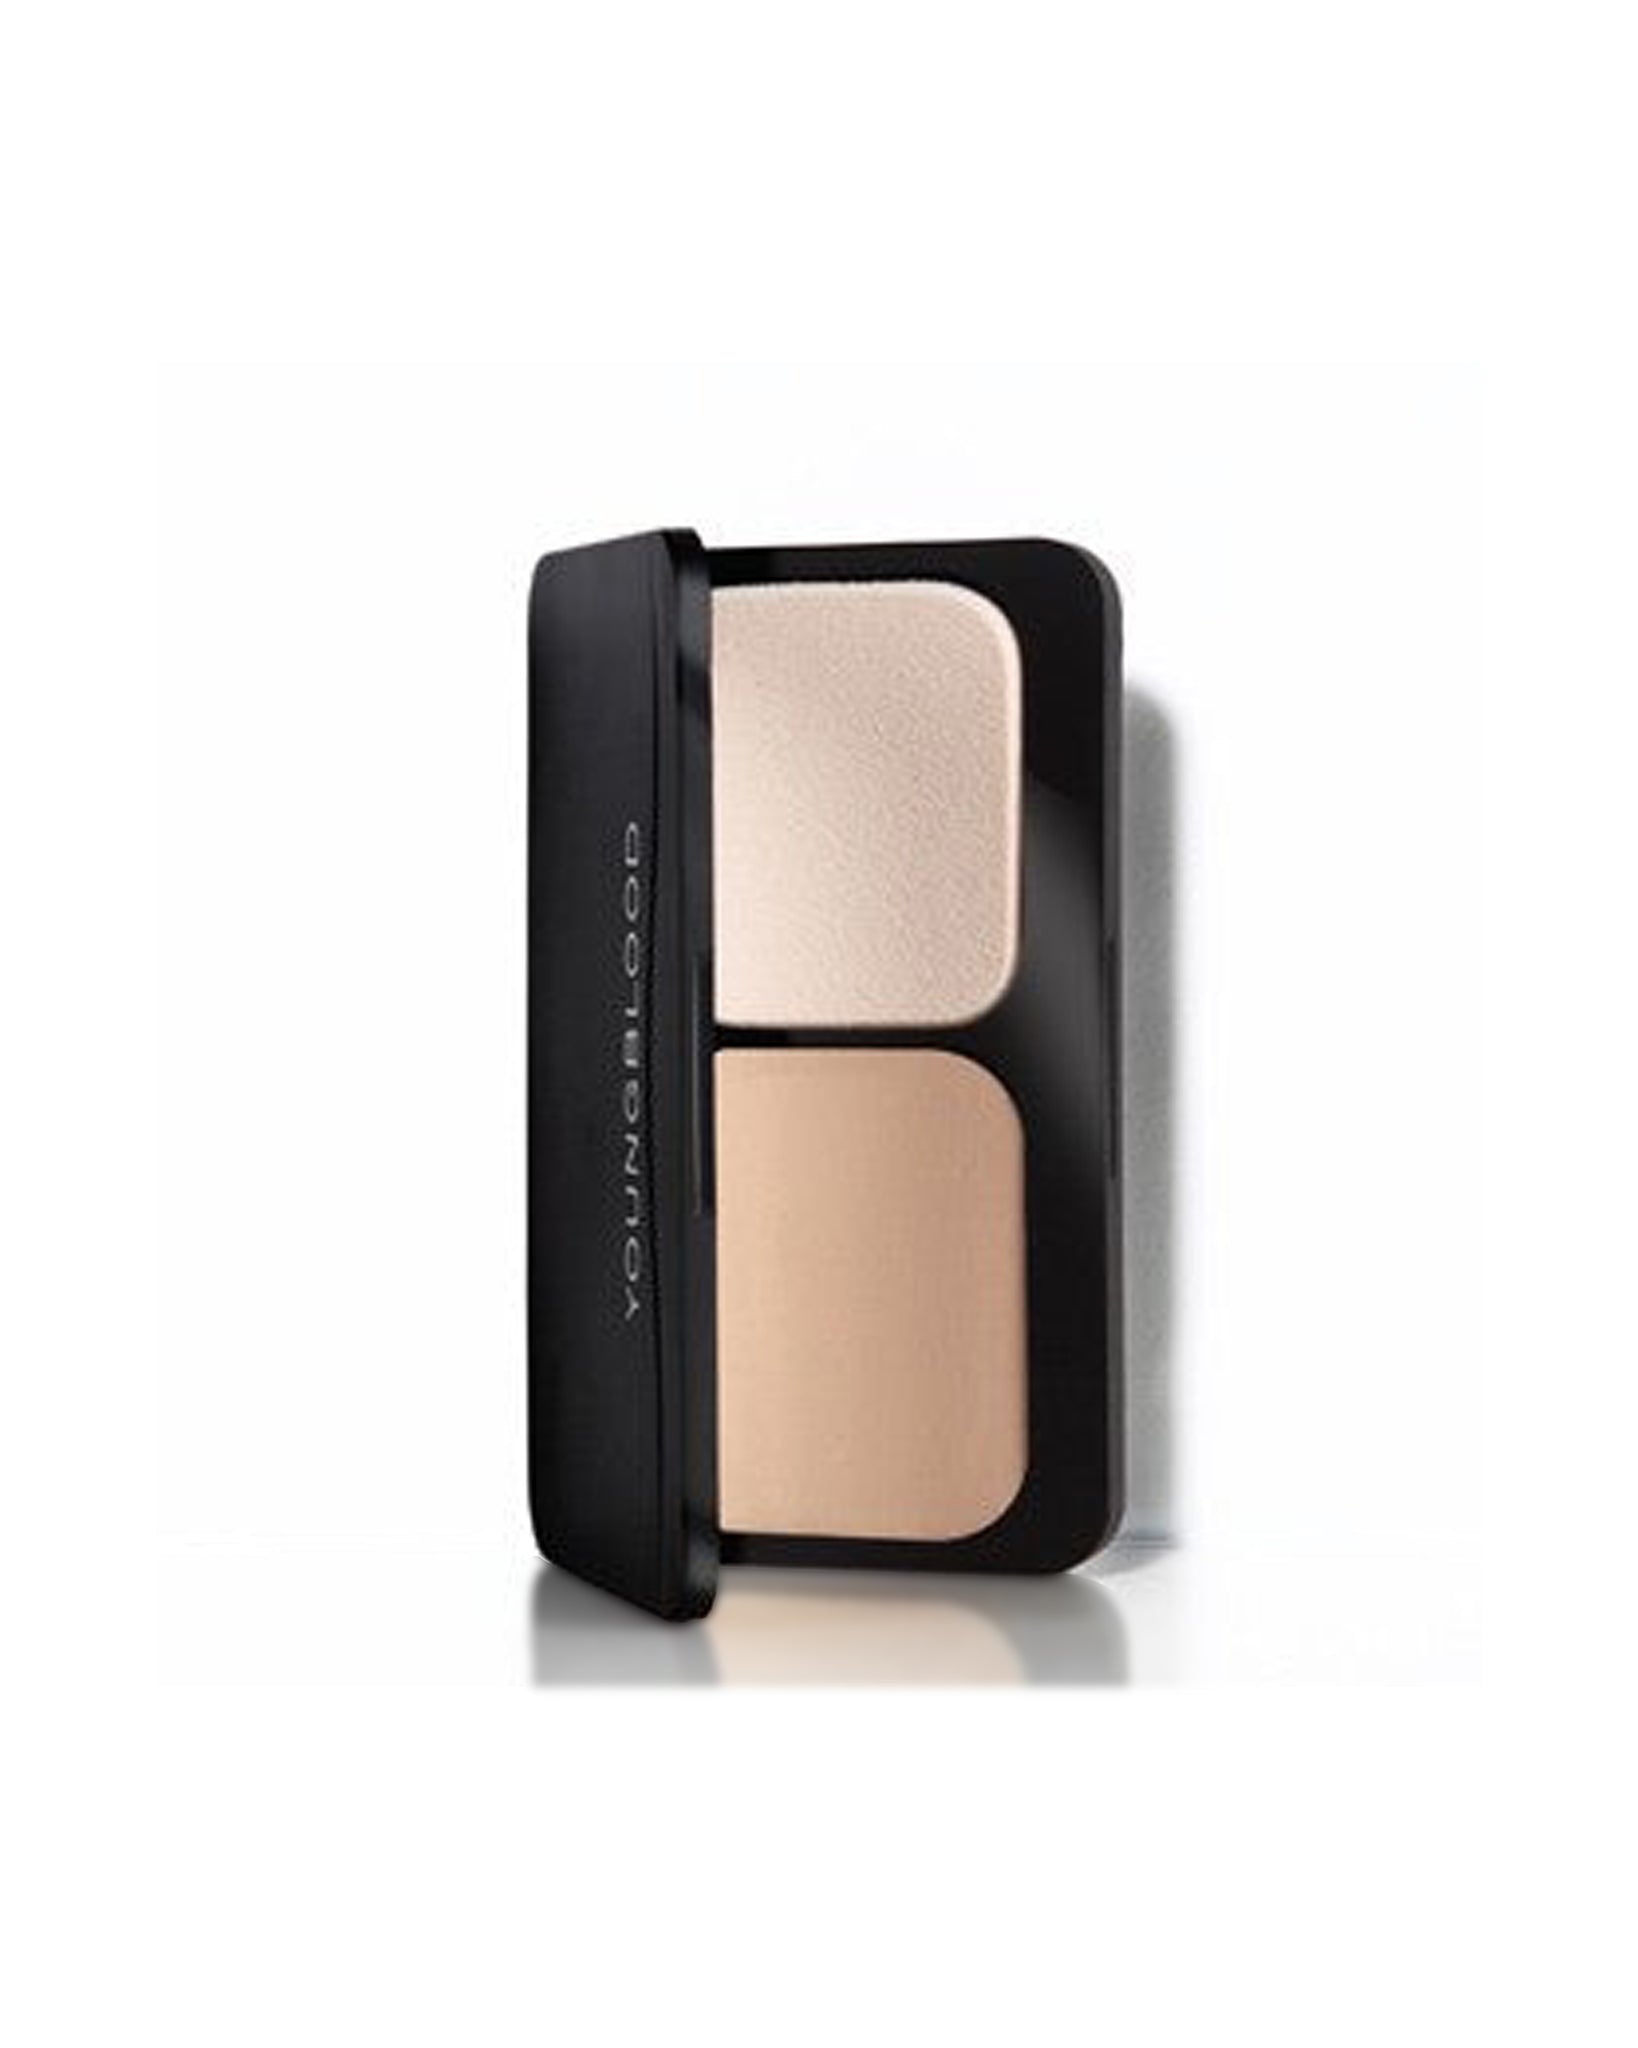 youngblood pressed mineral foundation powder